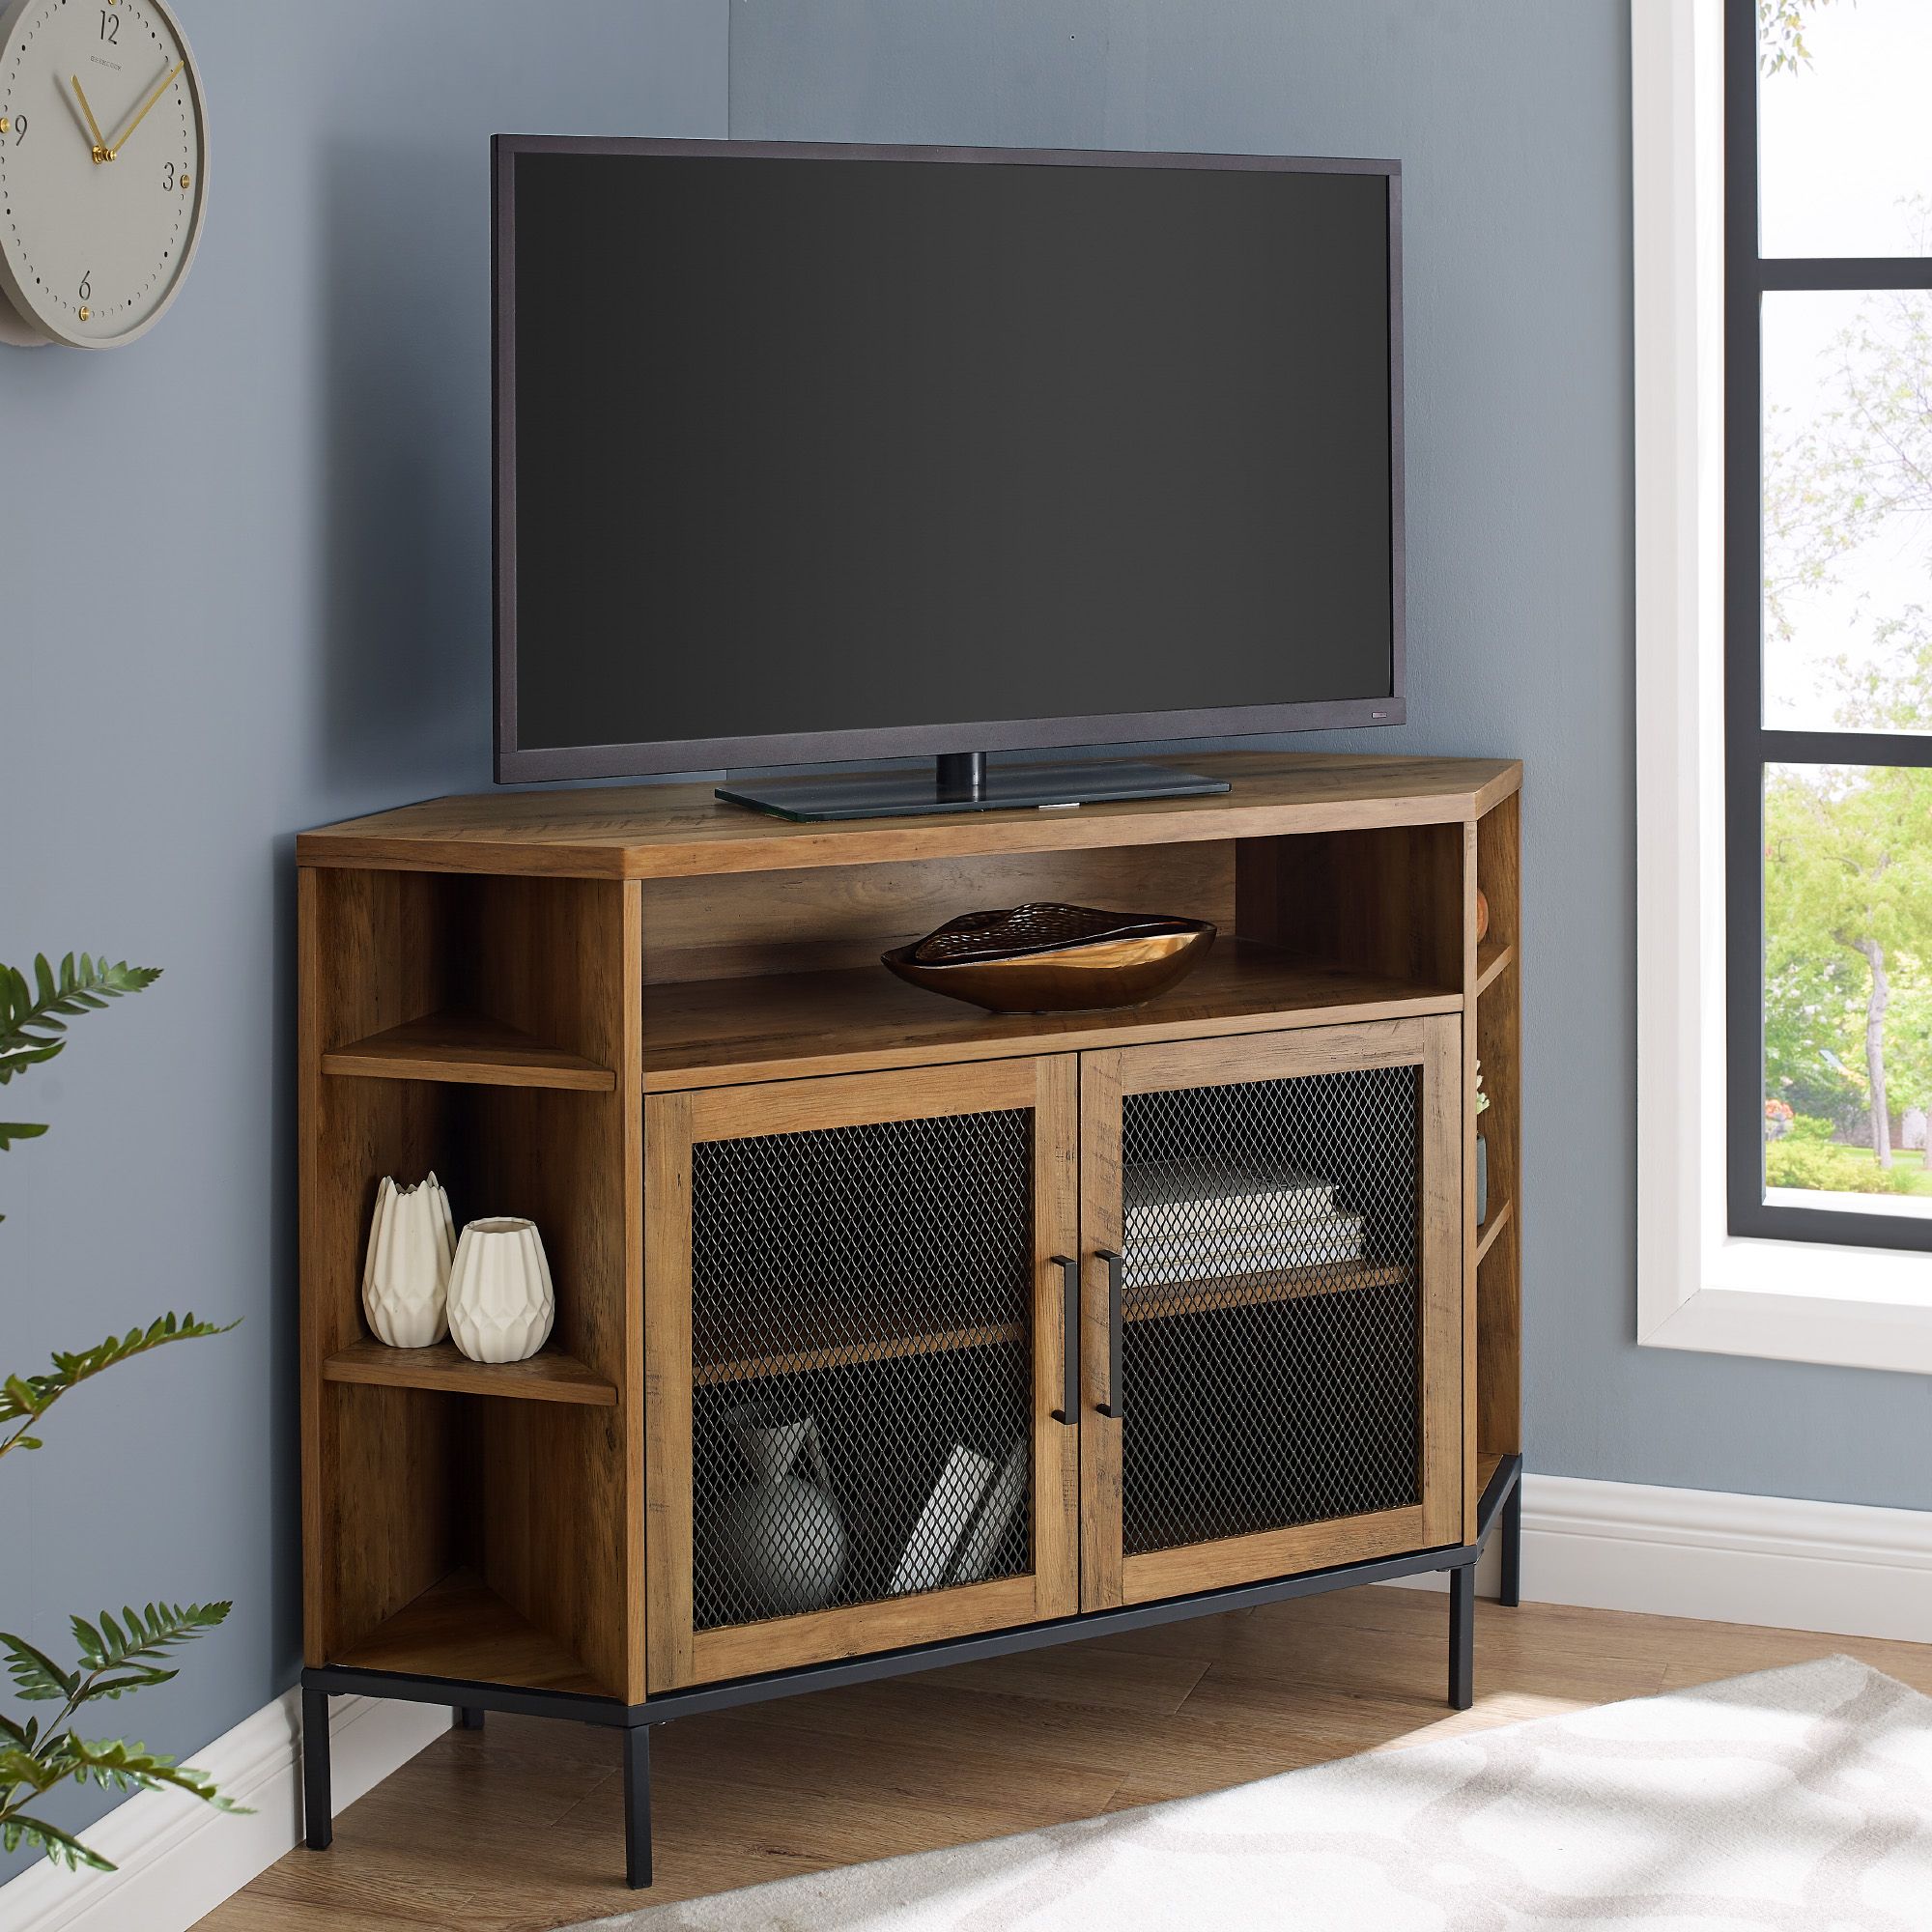 Manor Park 48 Inch Corner Tv Stand For Tvs Up To 55 Within Corner Tv Stands For Tvs Up To 48" Mahogany (View 1 of 15)